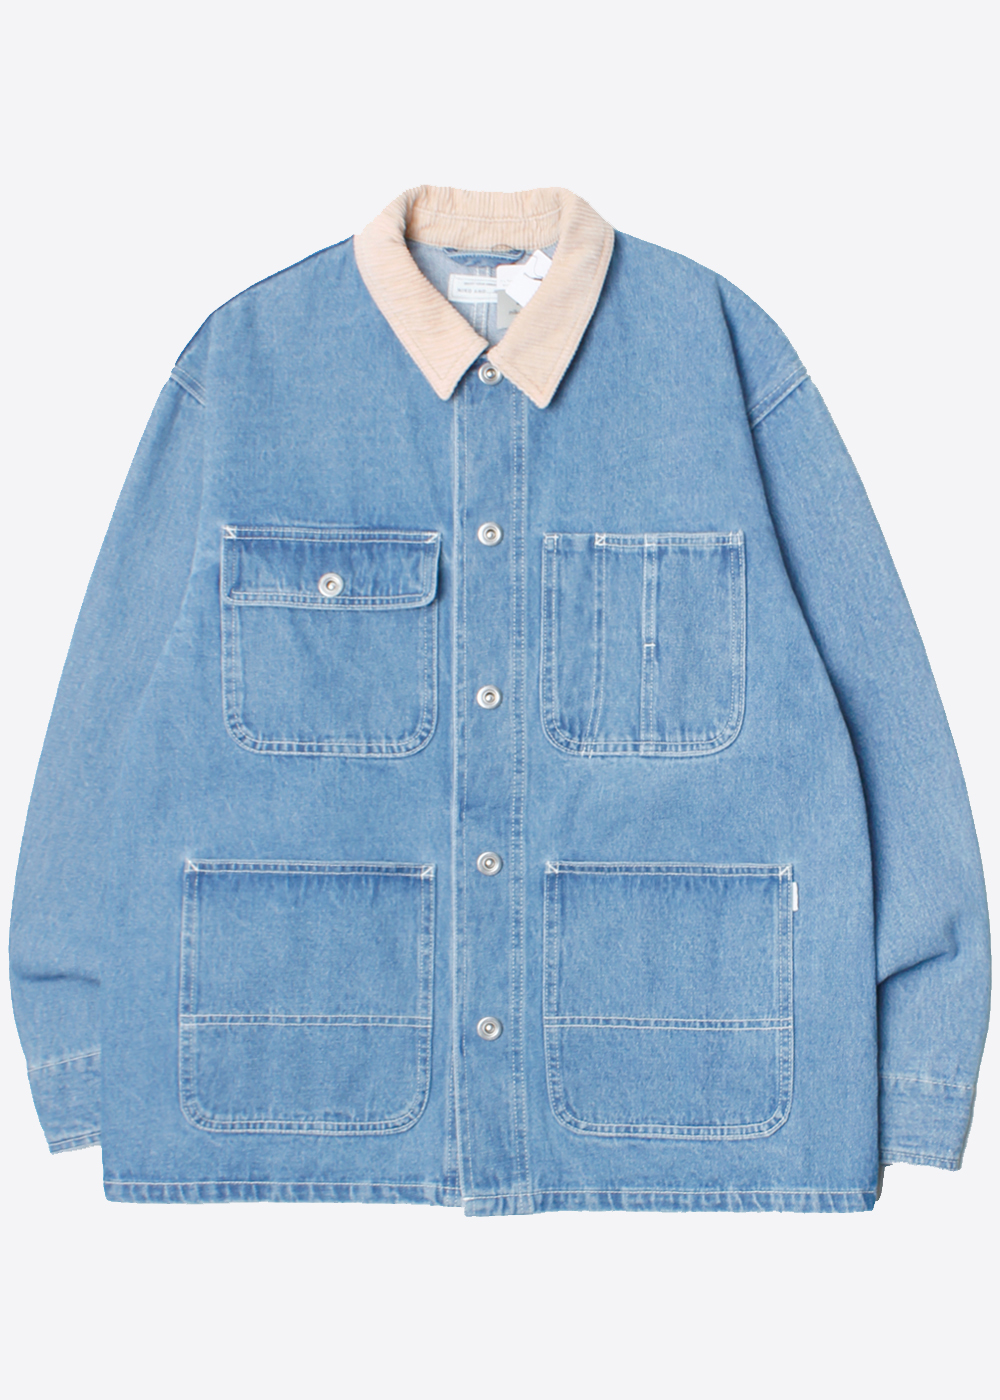 NIKO AND’over fit’ denim work coverall